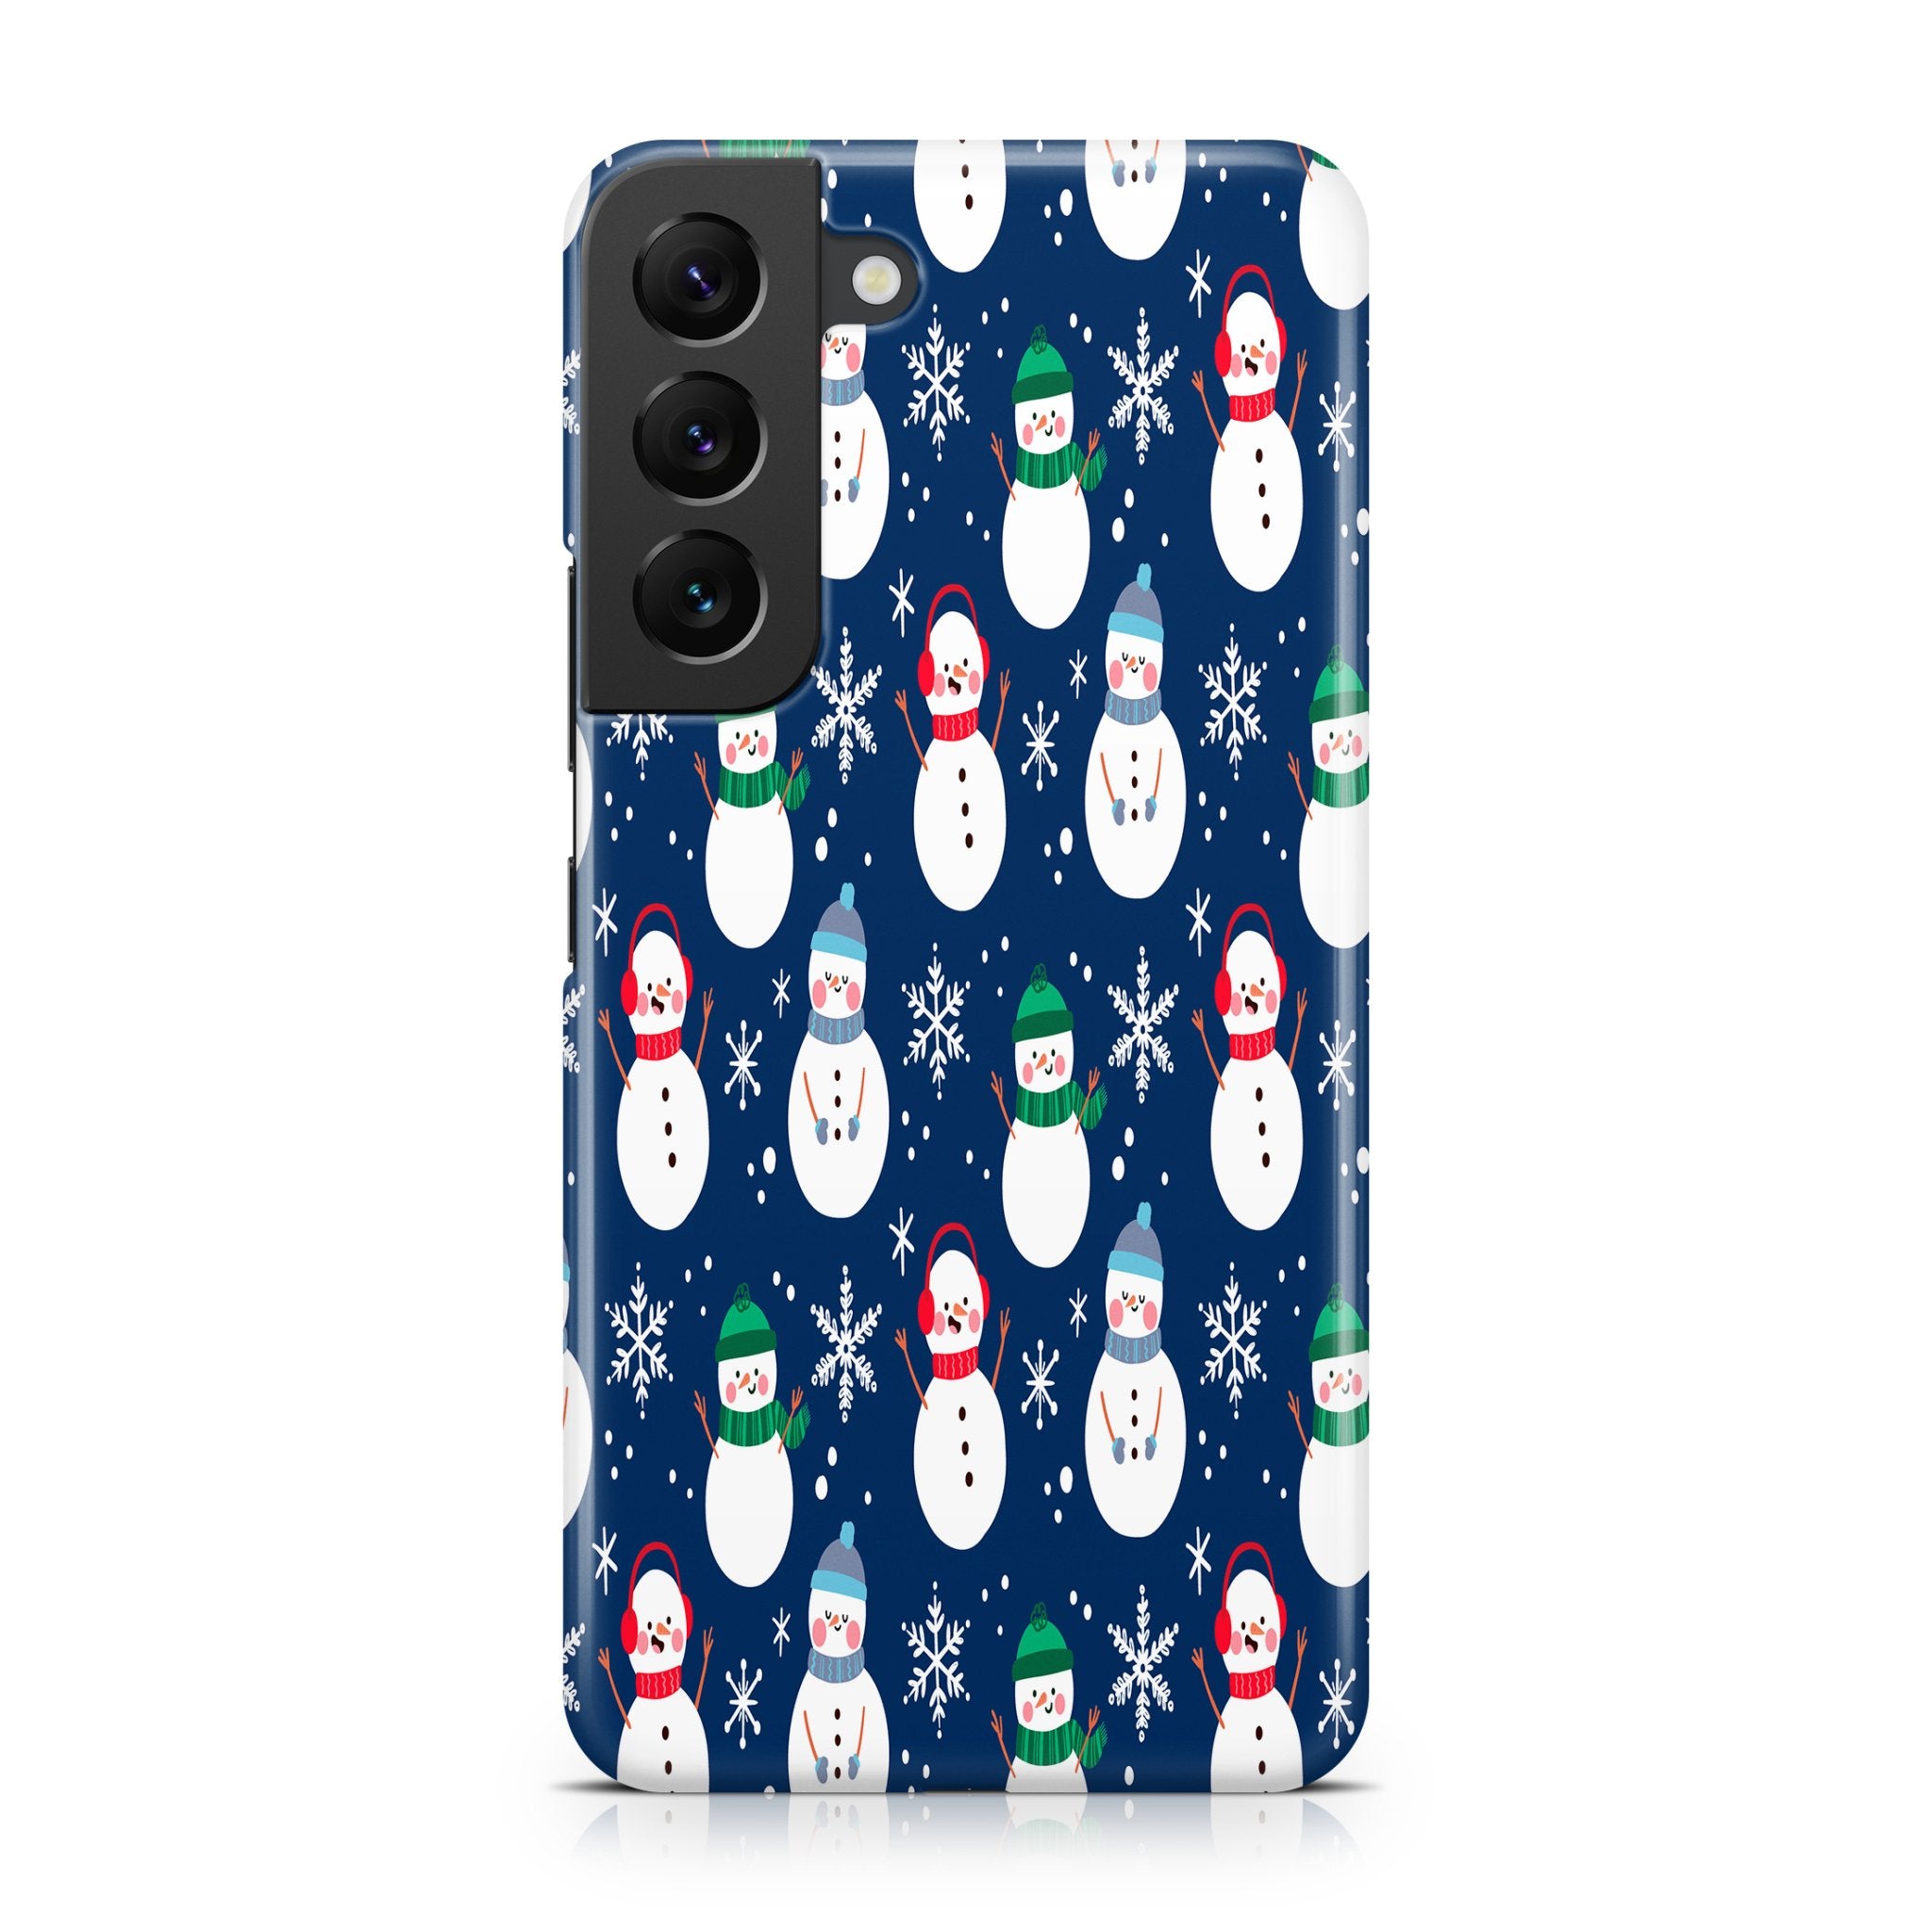 Christmas Snowman - Samsung phone case designs by CaseSwagger